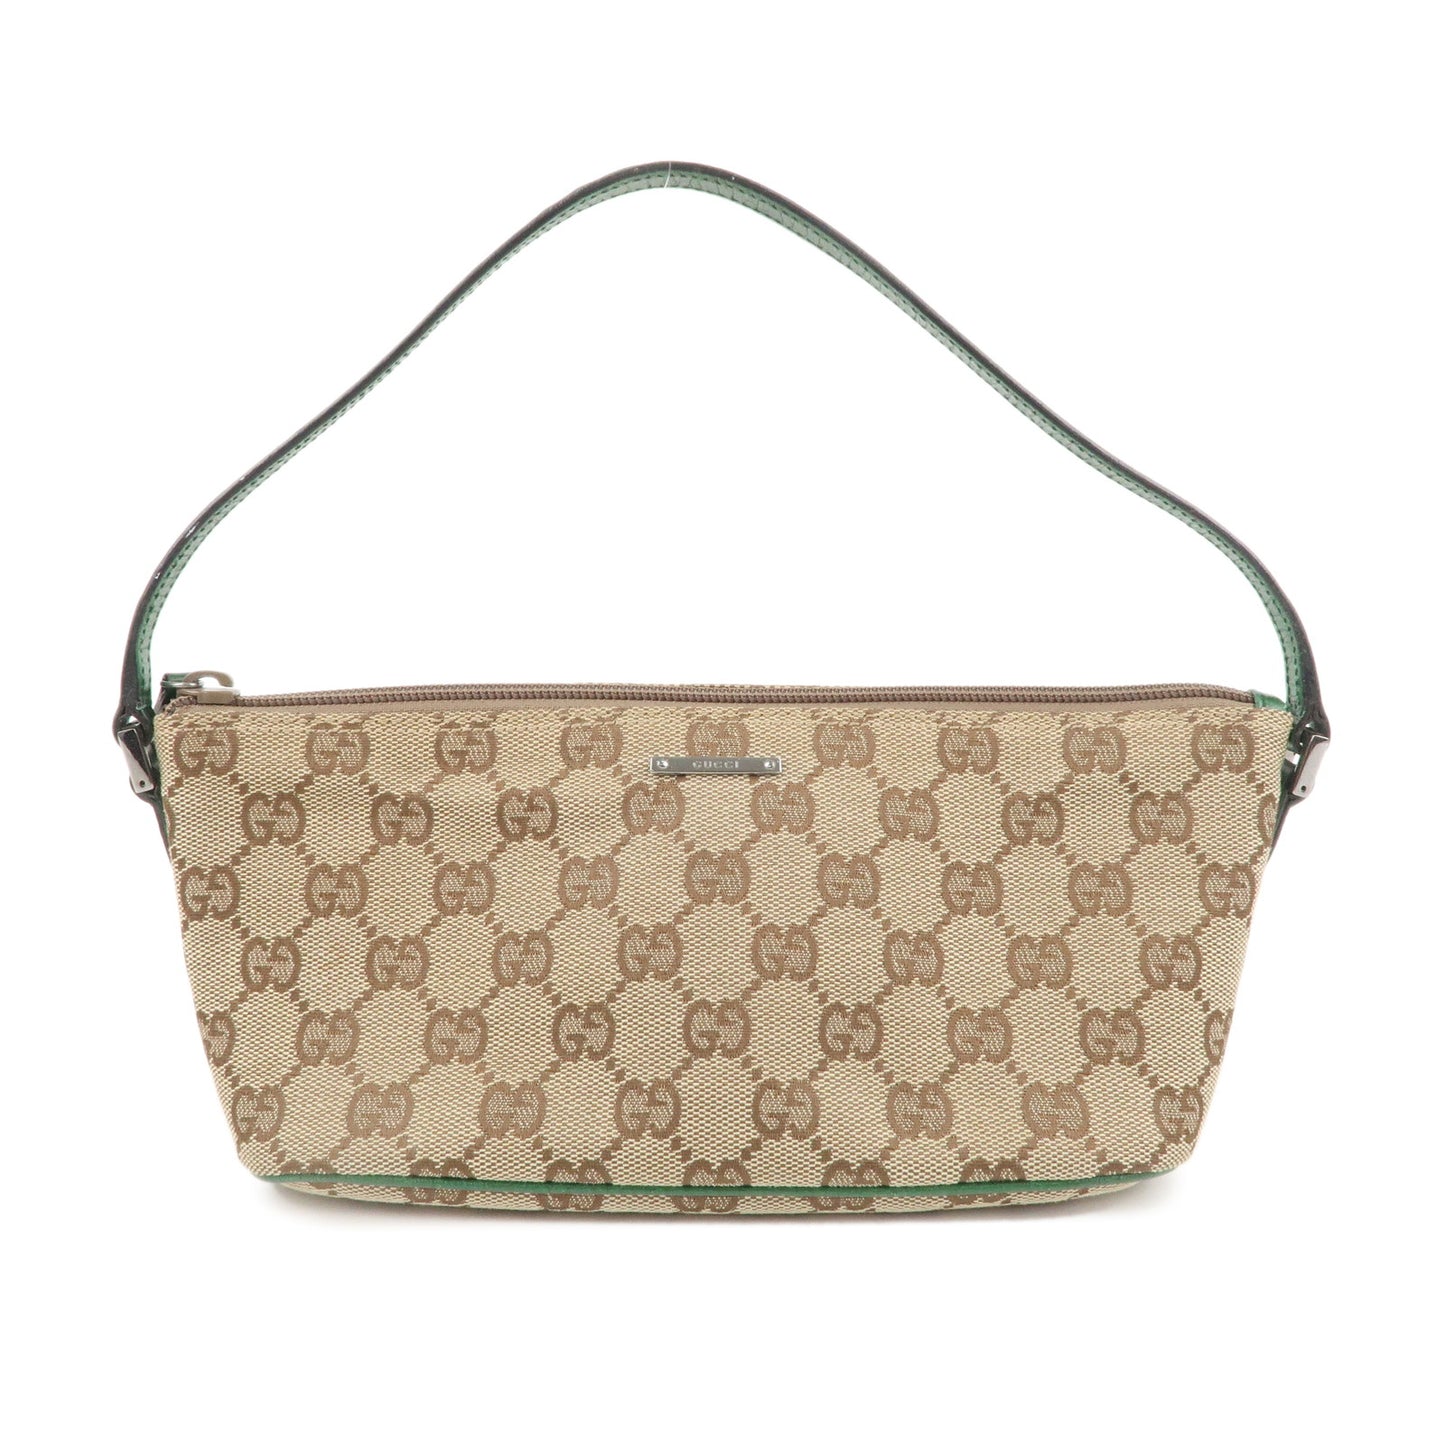 GUCCI Boat Bag GG Canvas Leather Bag Pouch Beige Brown Green 7198